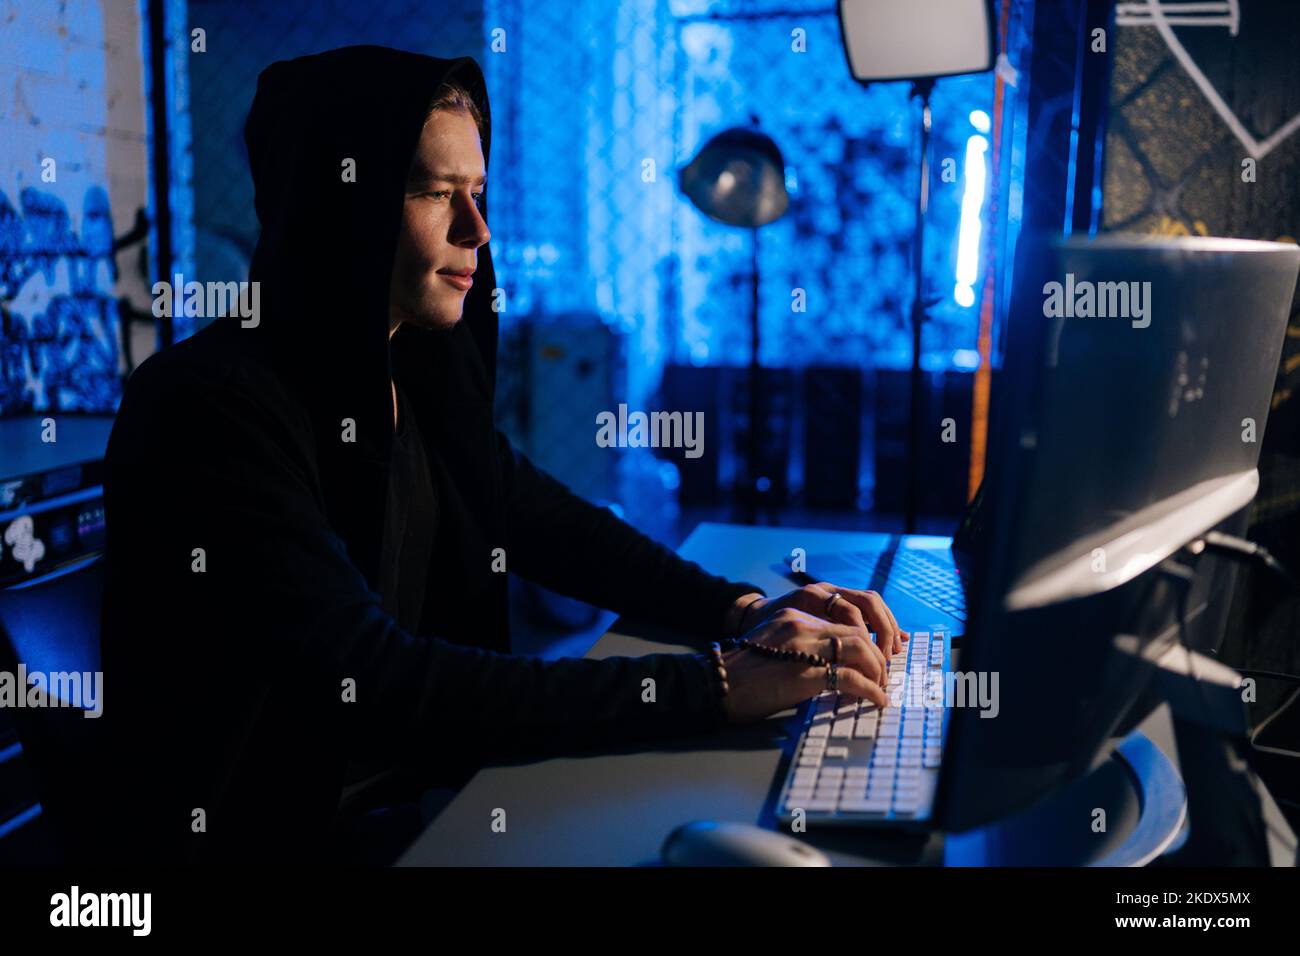 Side view of hidden hacker man wearing sweatshirt with hood engaged in hacking into security systems, sitting in dark room with blue neon lights Stock Photo